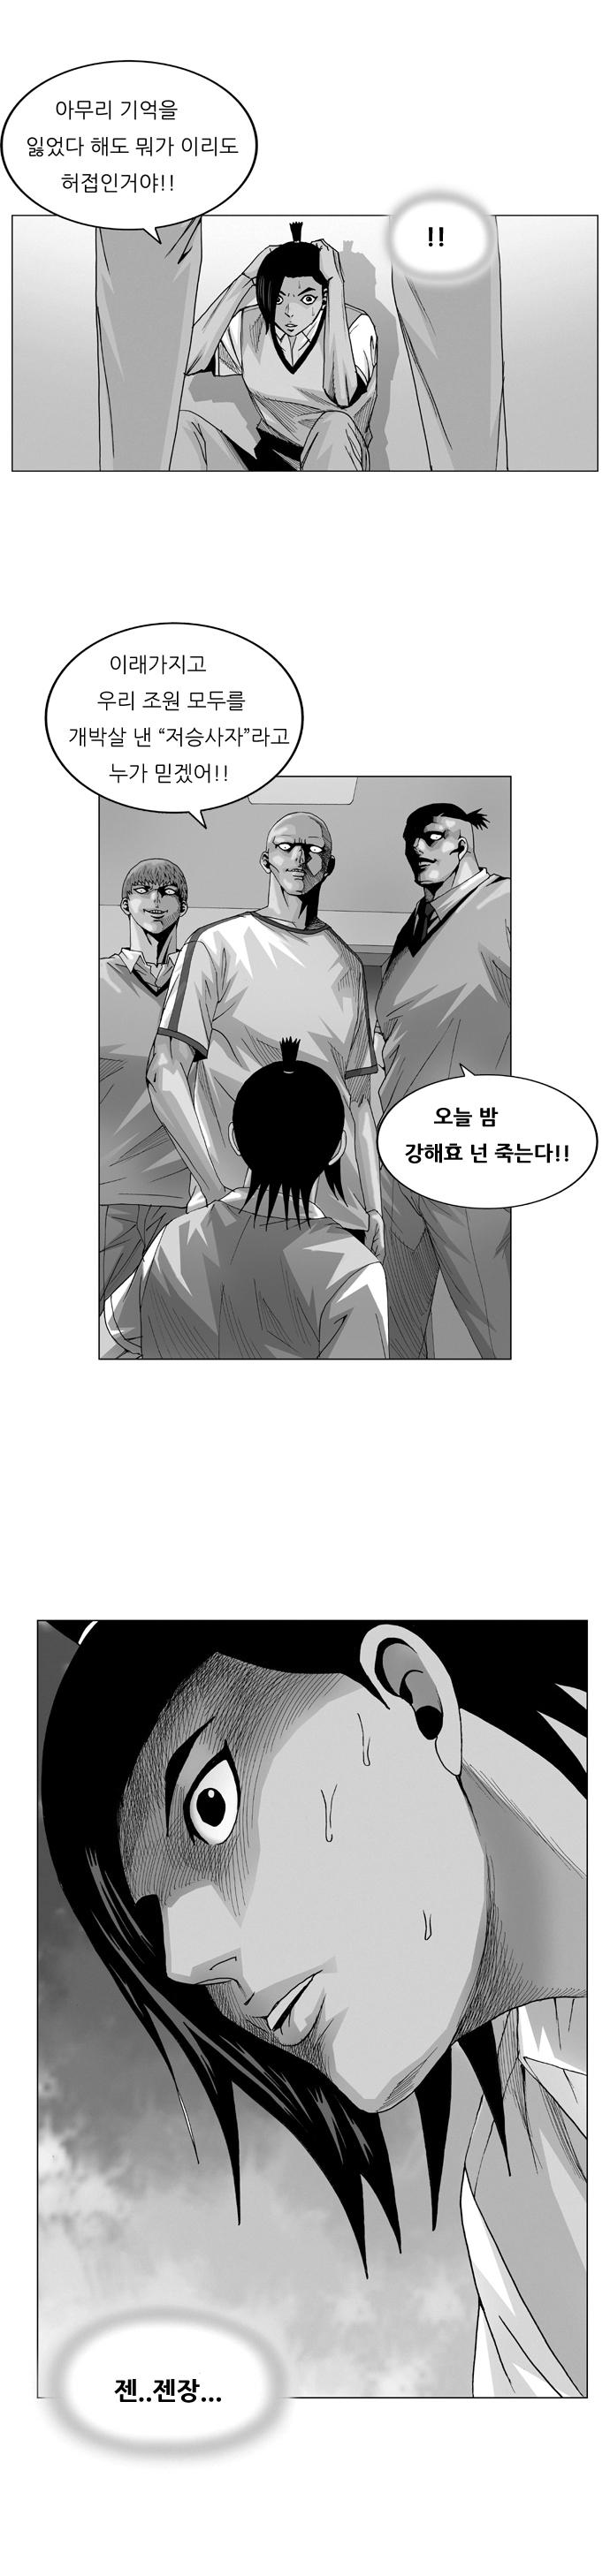 Ultimate Legend - Kang Hae Hyo - Chapter 51 - Page 1